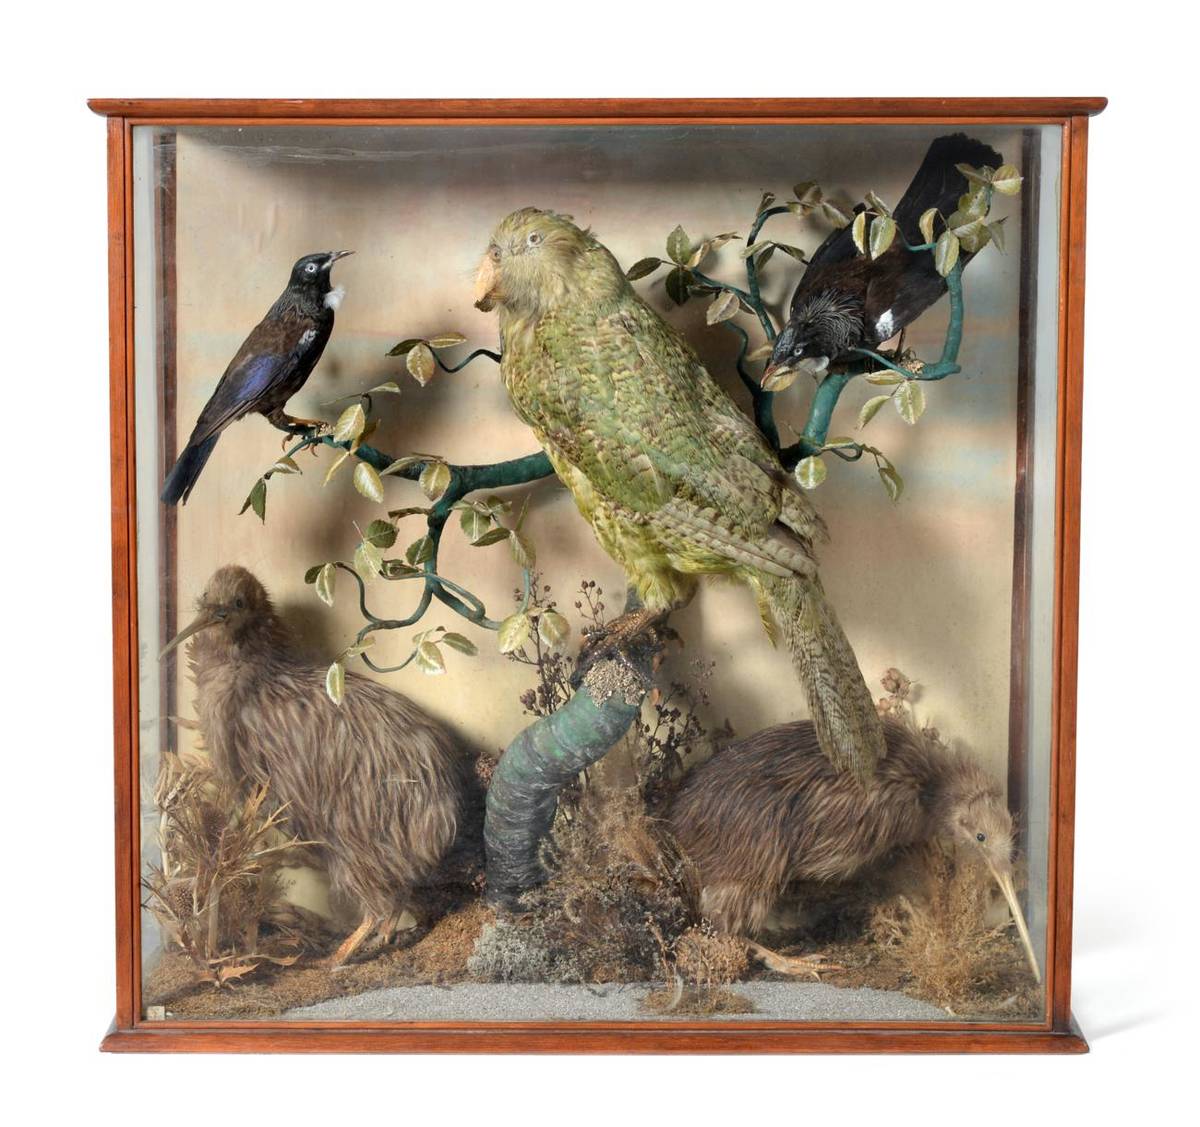 Lot 328 - An Extremely Important Taxidermy Case of Rare New Zealand Birds, circa 1862-1909, comprising Kakapo